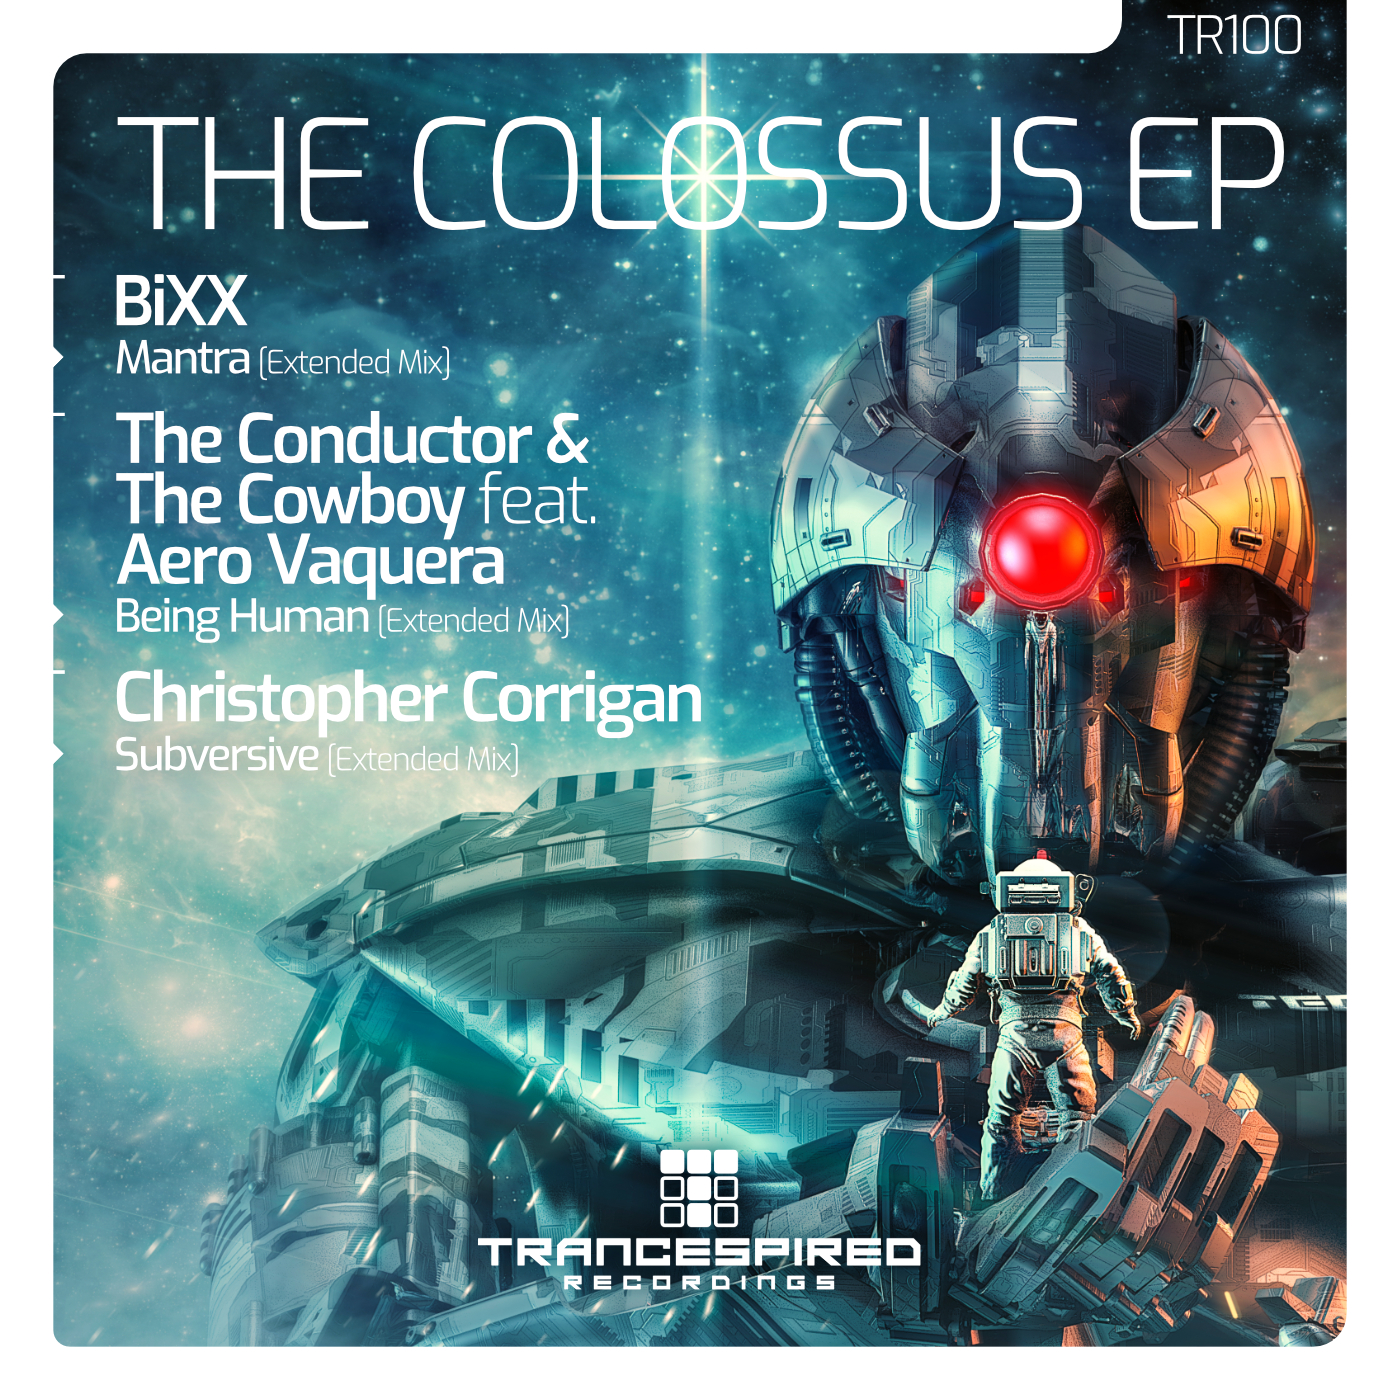 BiXX, The Conductor and The Cowboy, Christopher Corrigan presents The Colossus EP on Trancespired Recordings